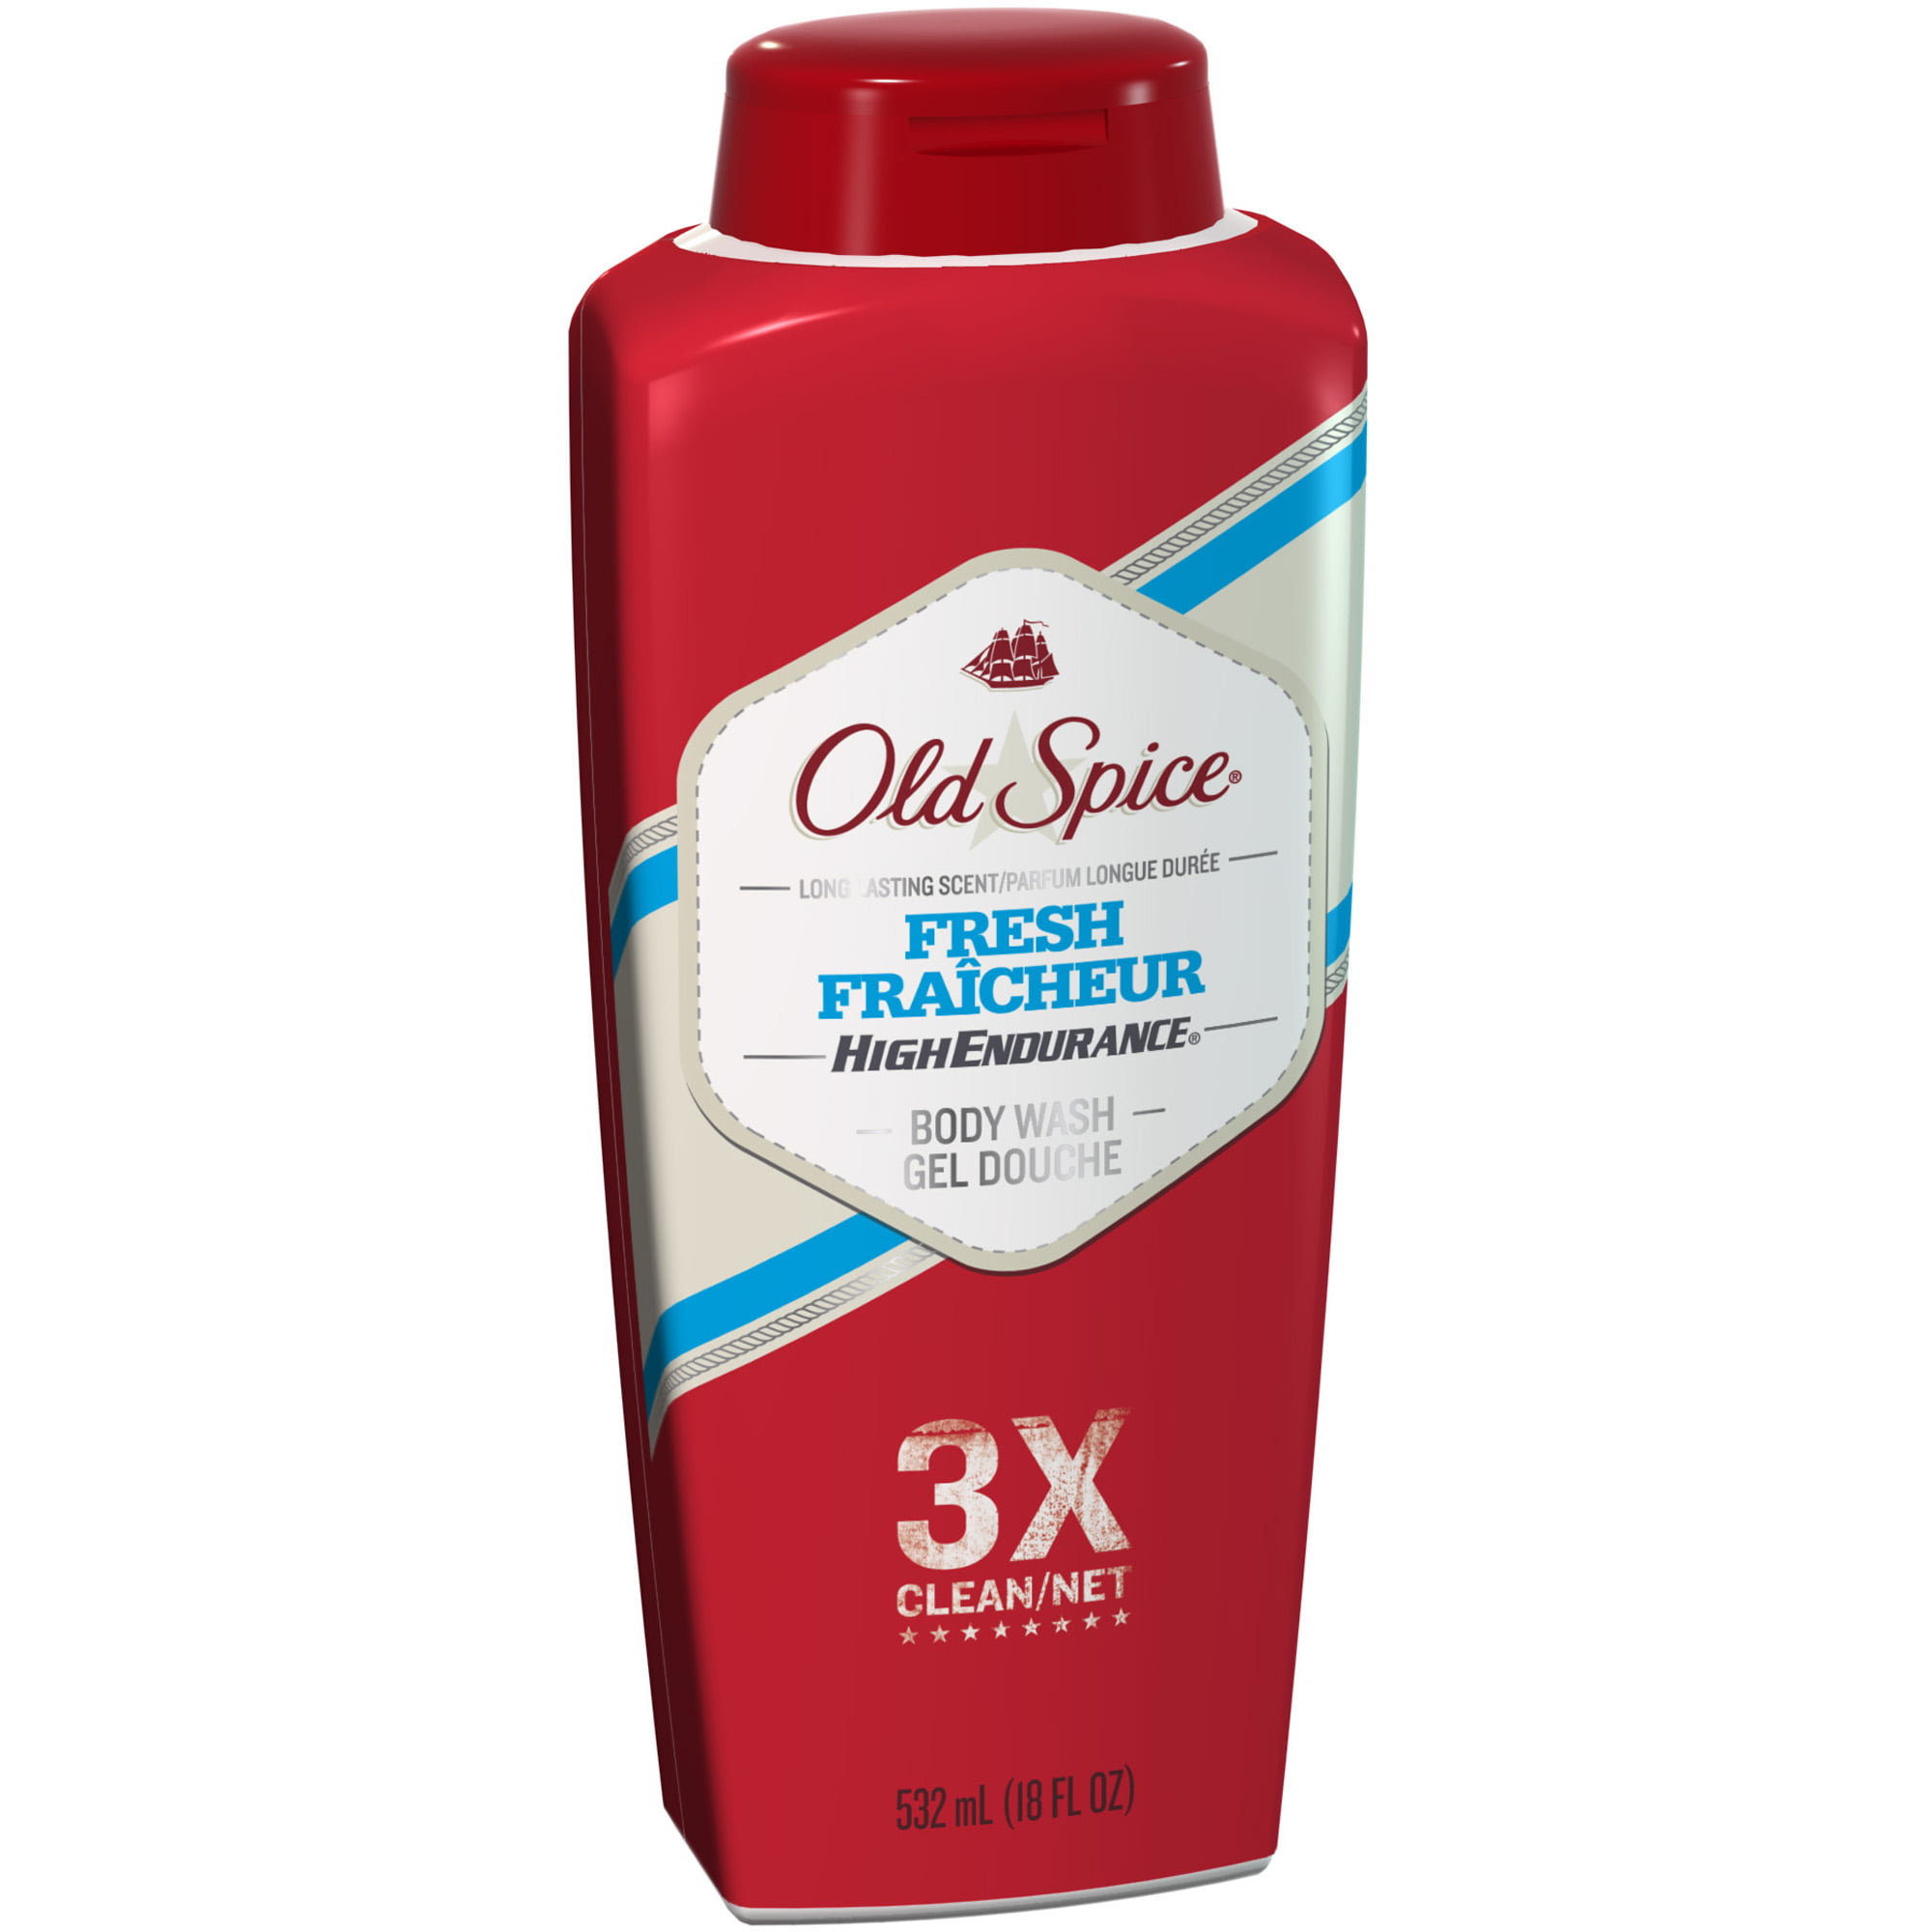 What are some highly rated body washes?